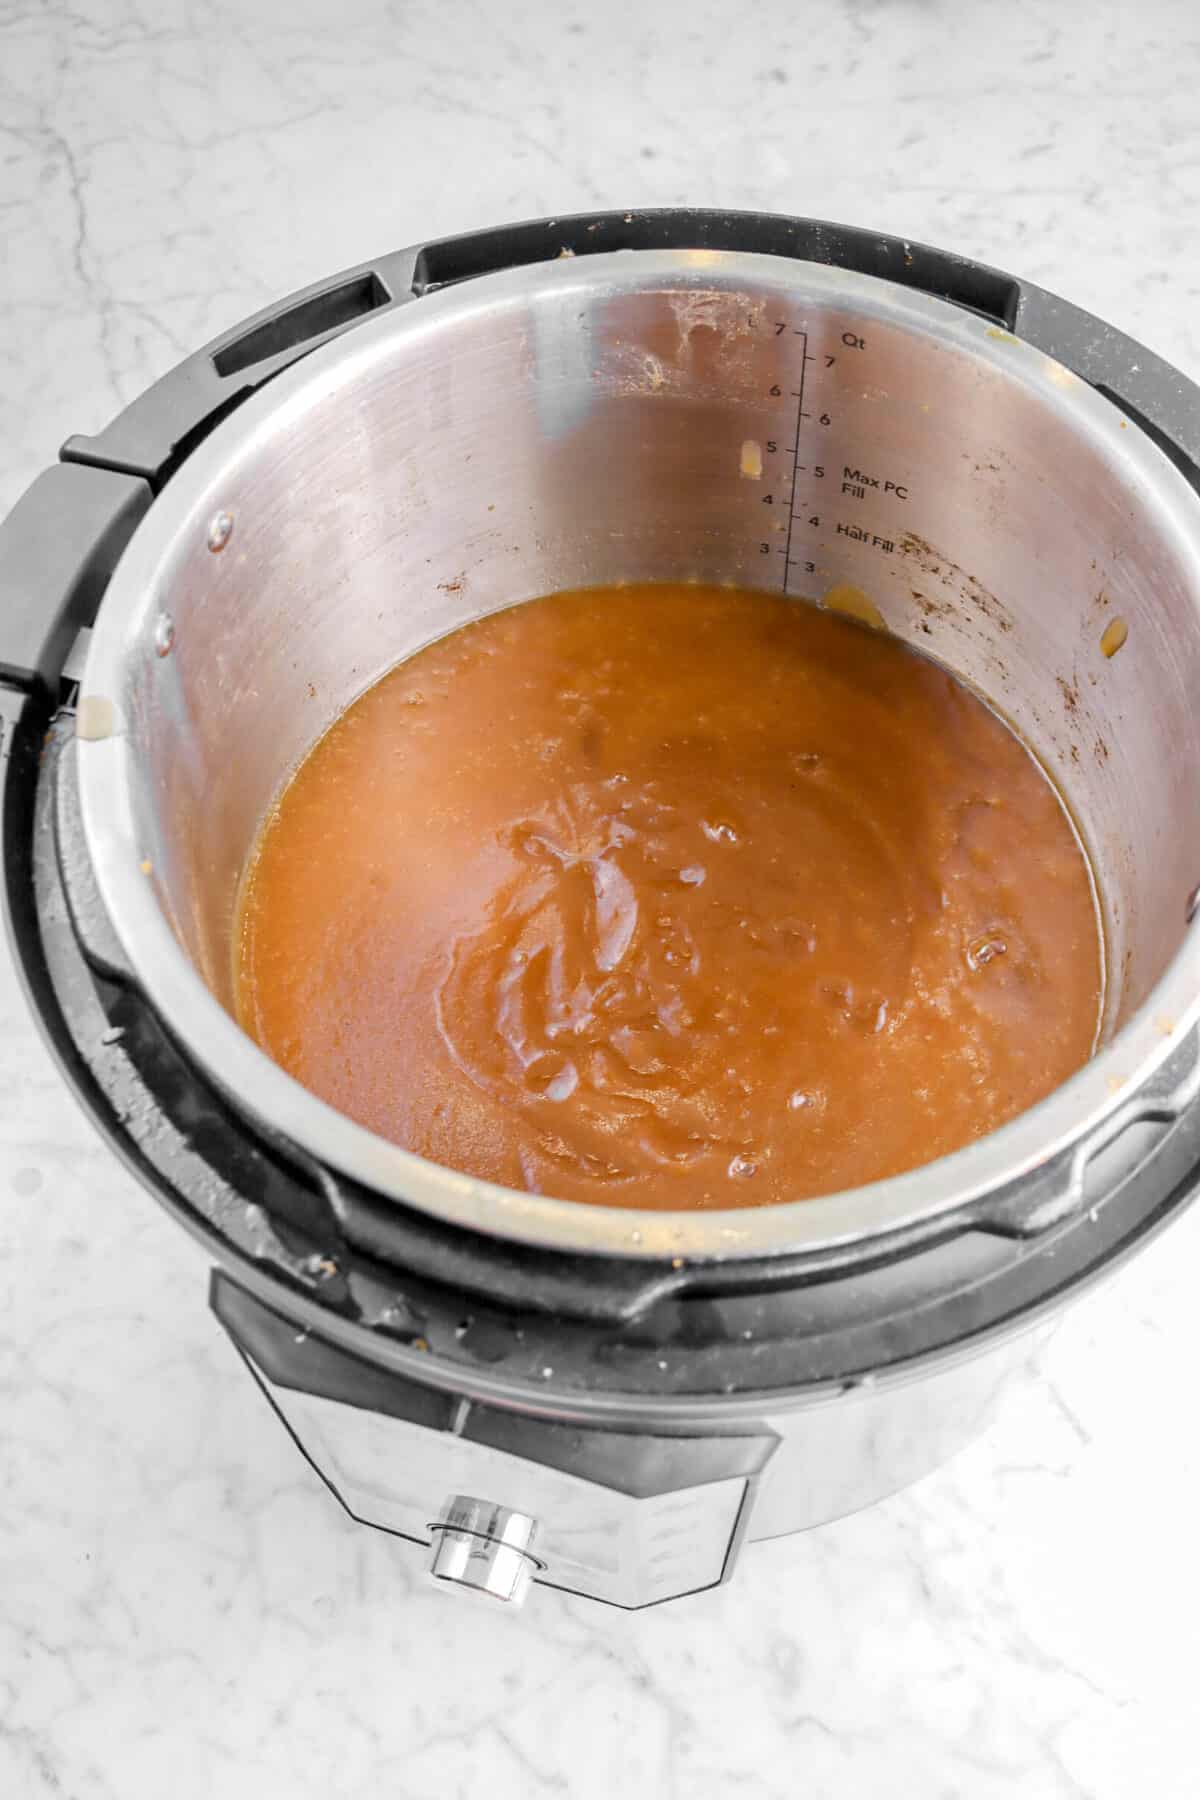 blended apple mixture in the instant pot